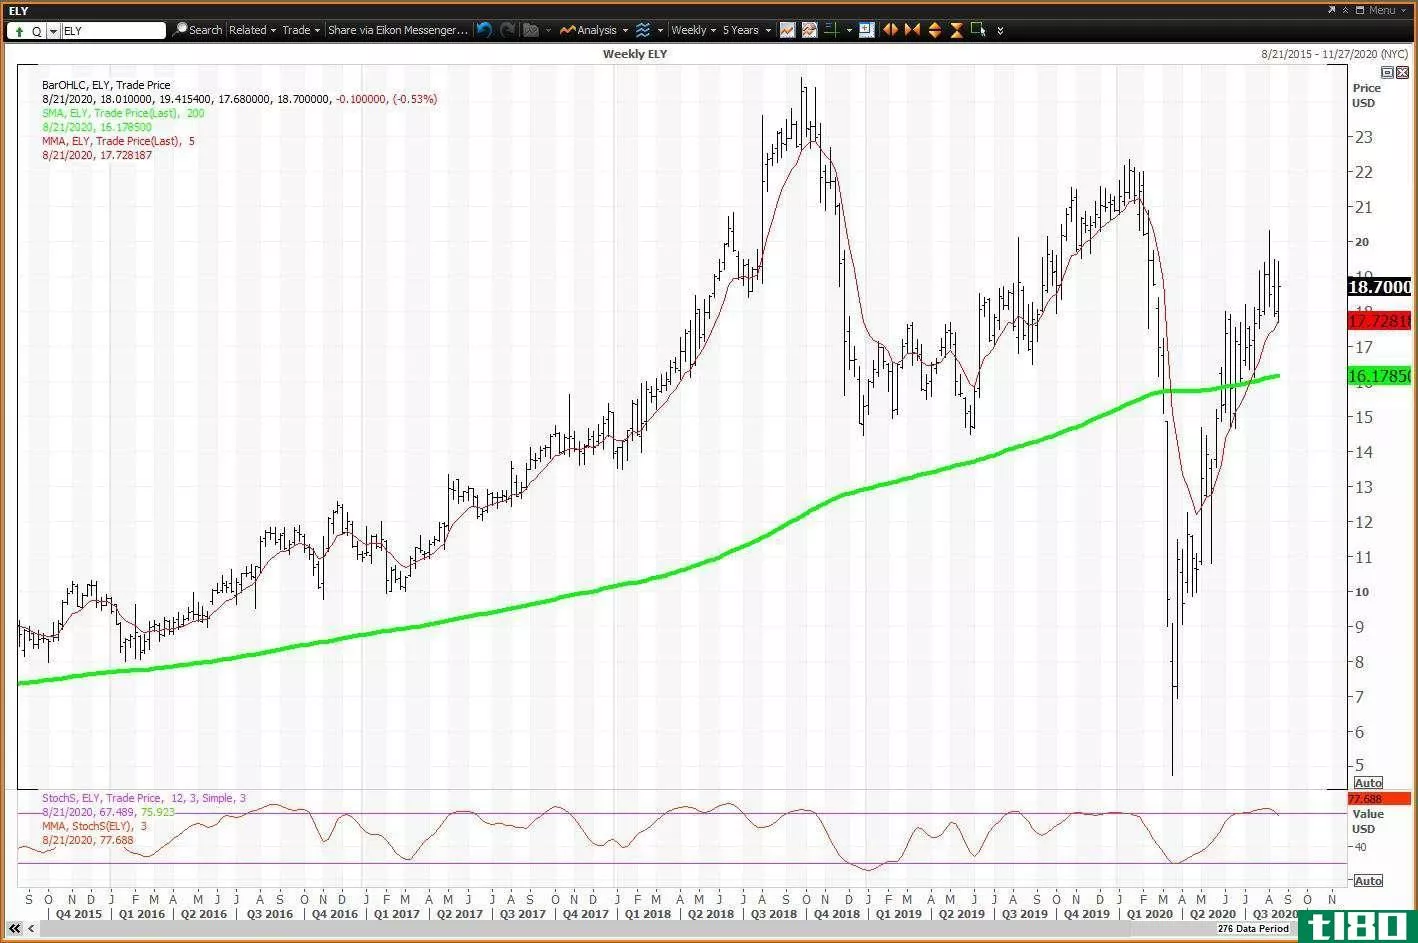 Weekly chart showing the share price performance of Callaway Golf Company (ELY)